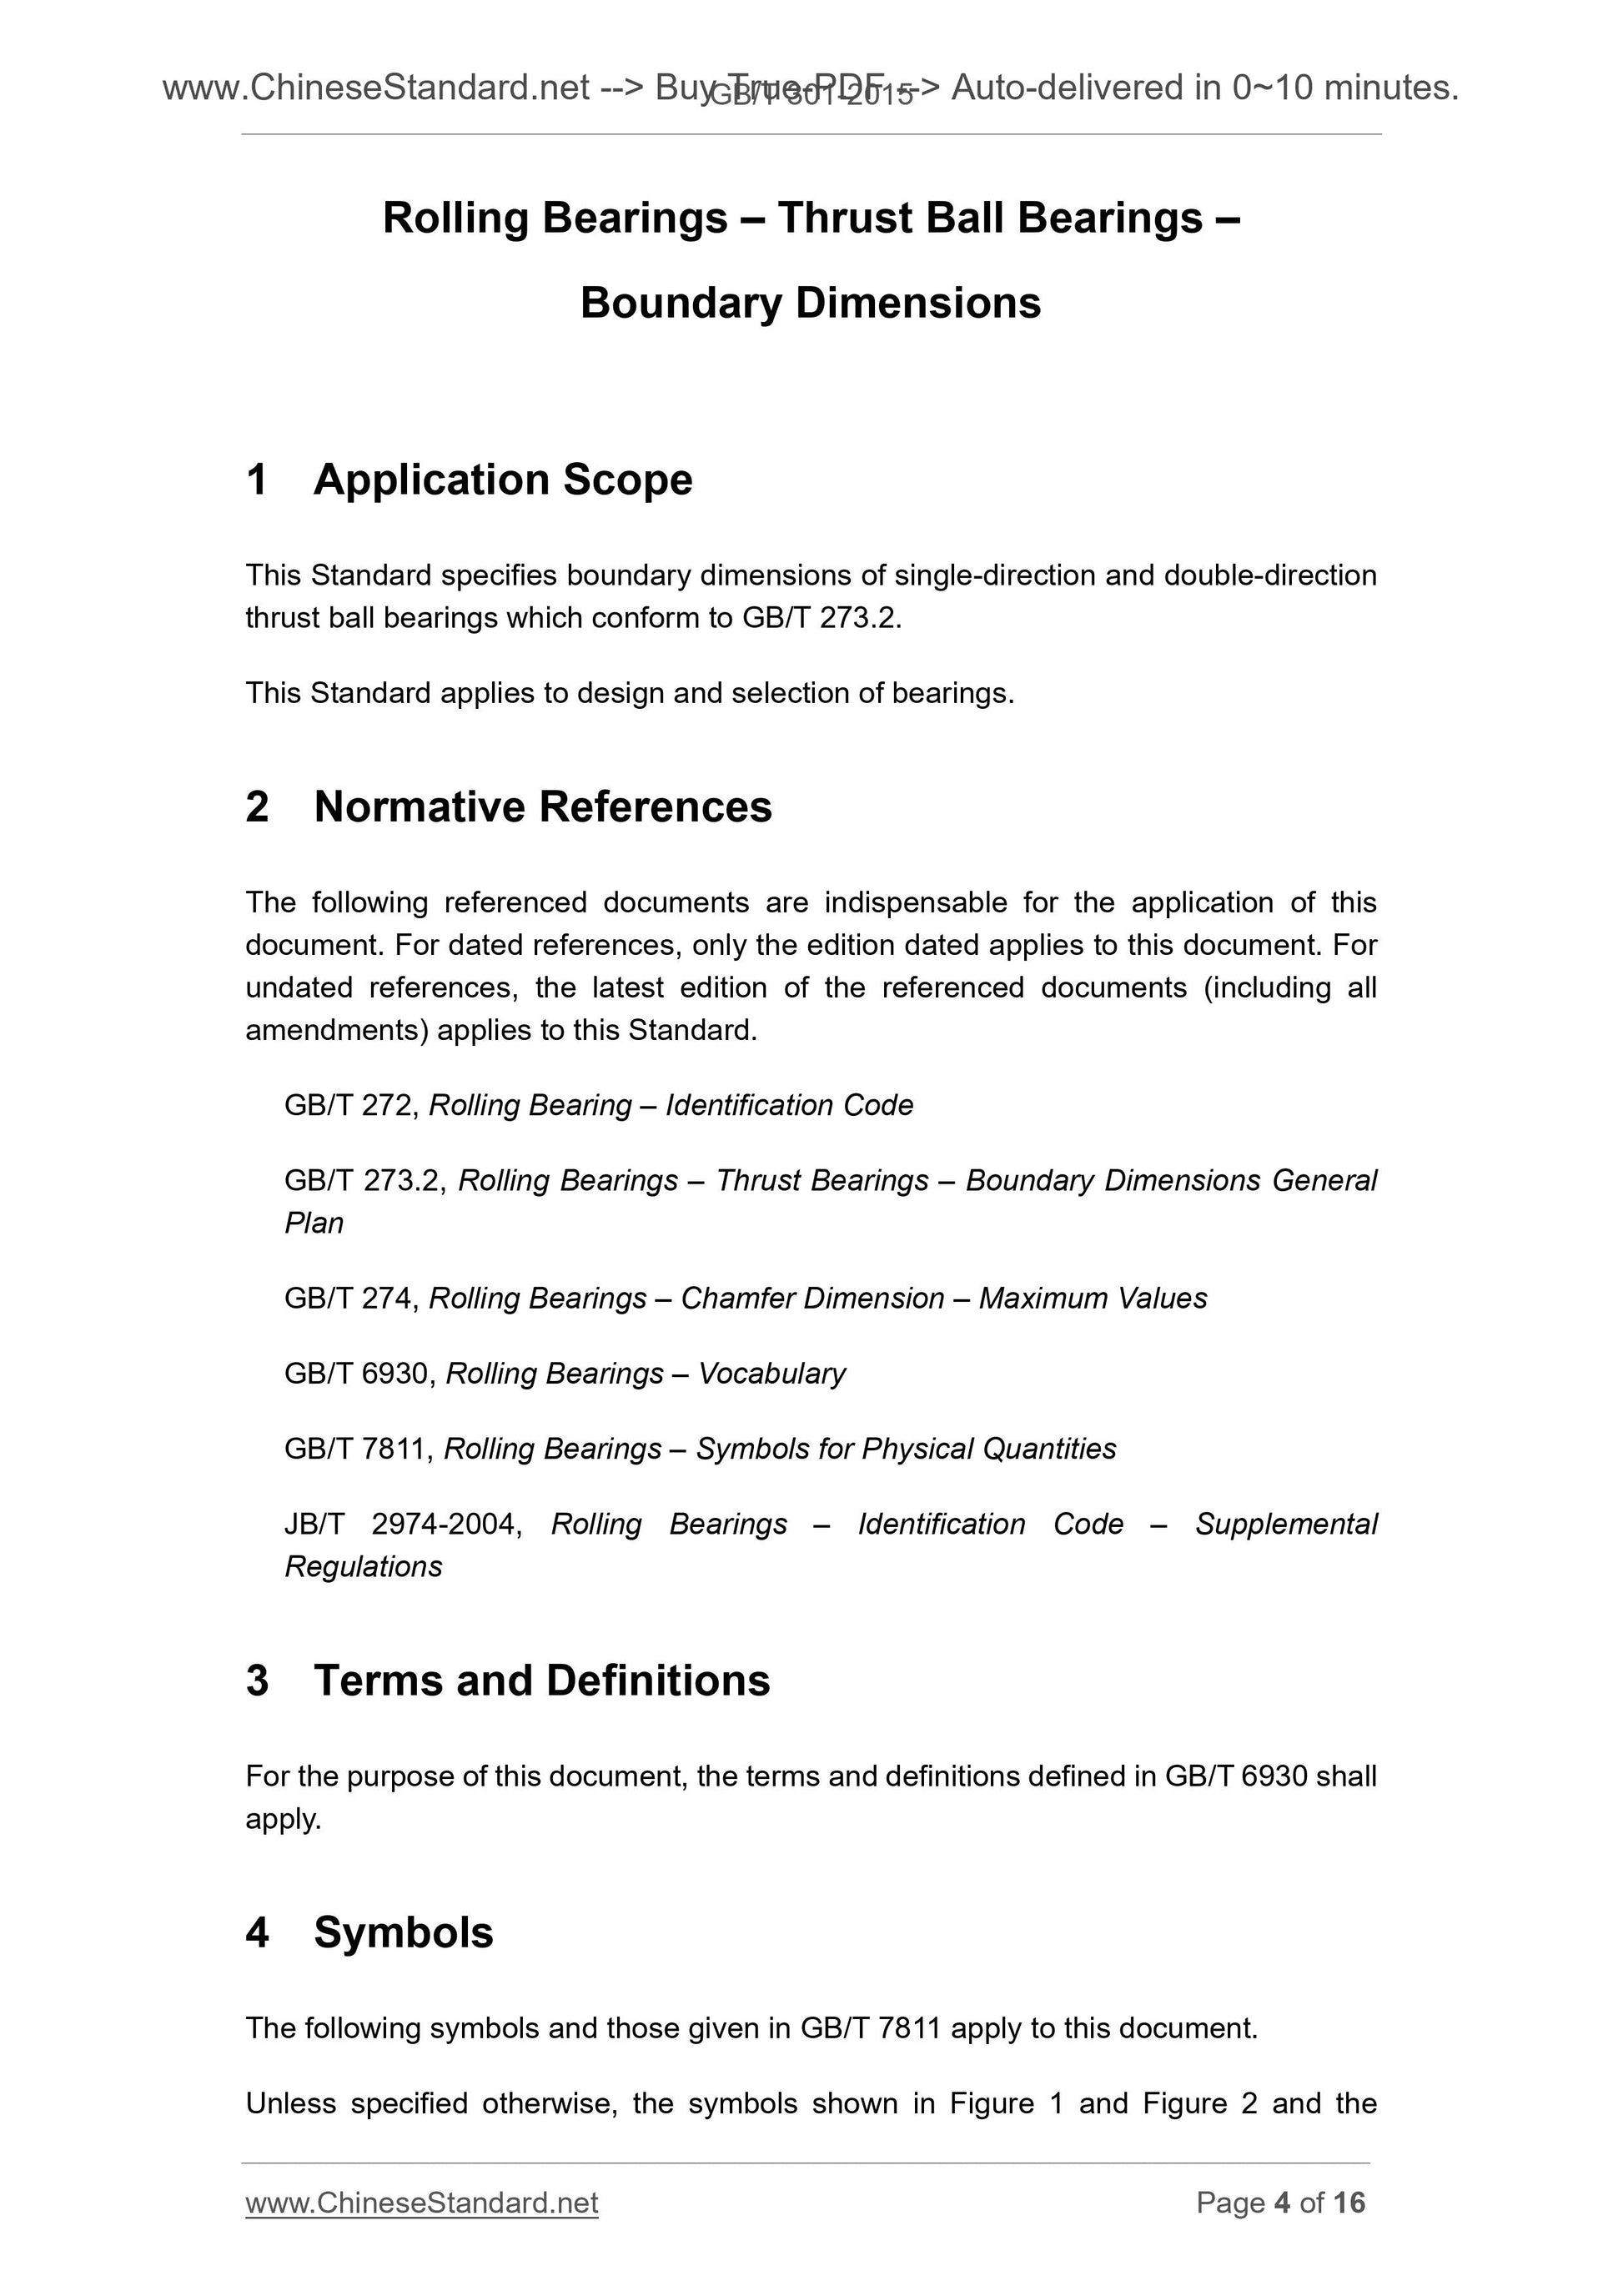 GB/T 301-2015 Page 4